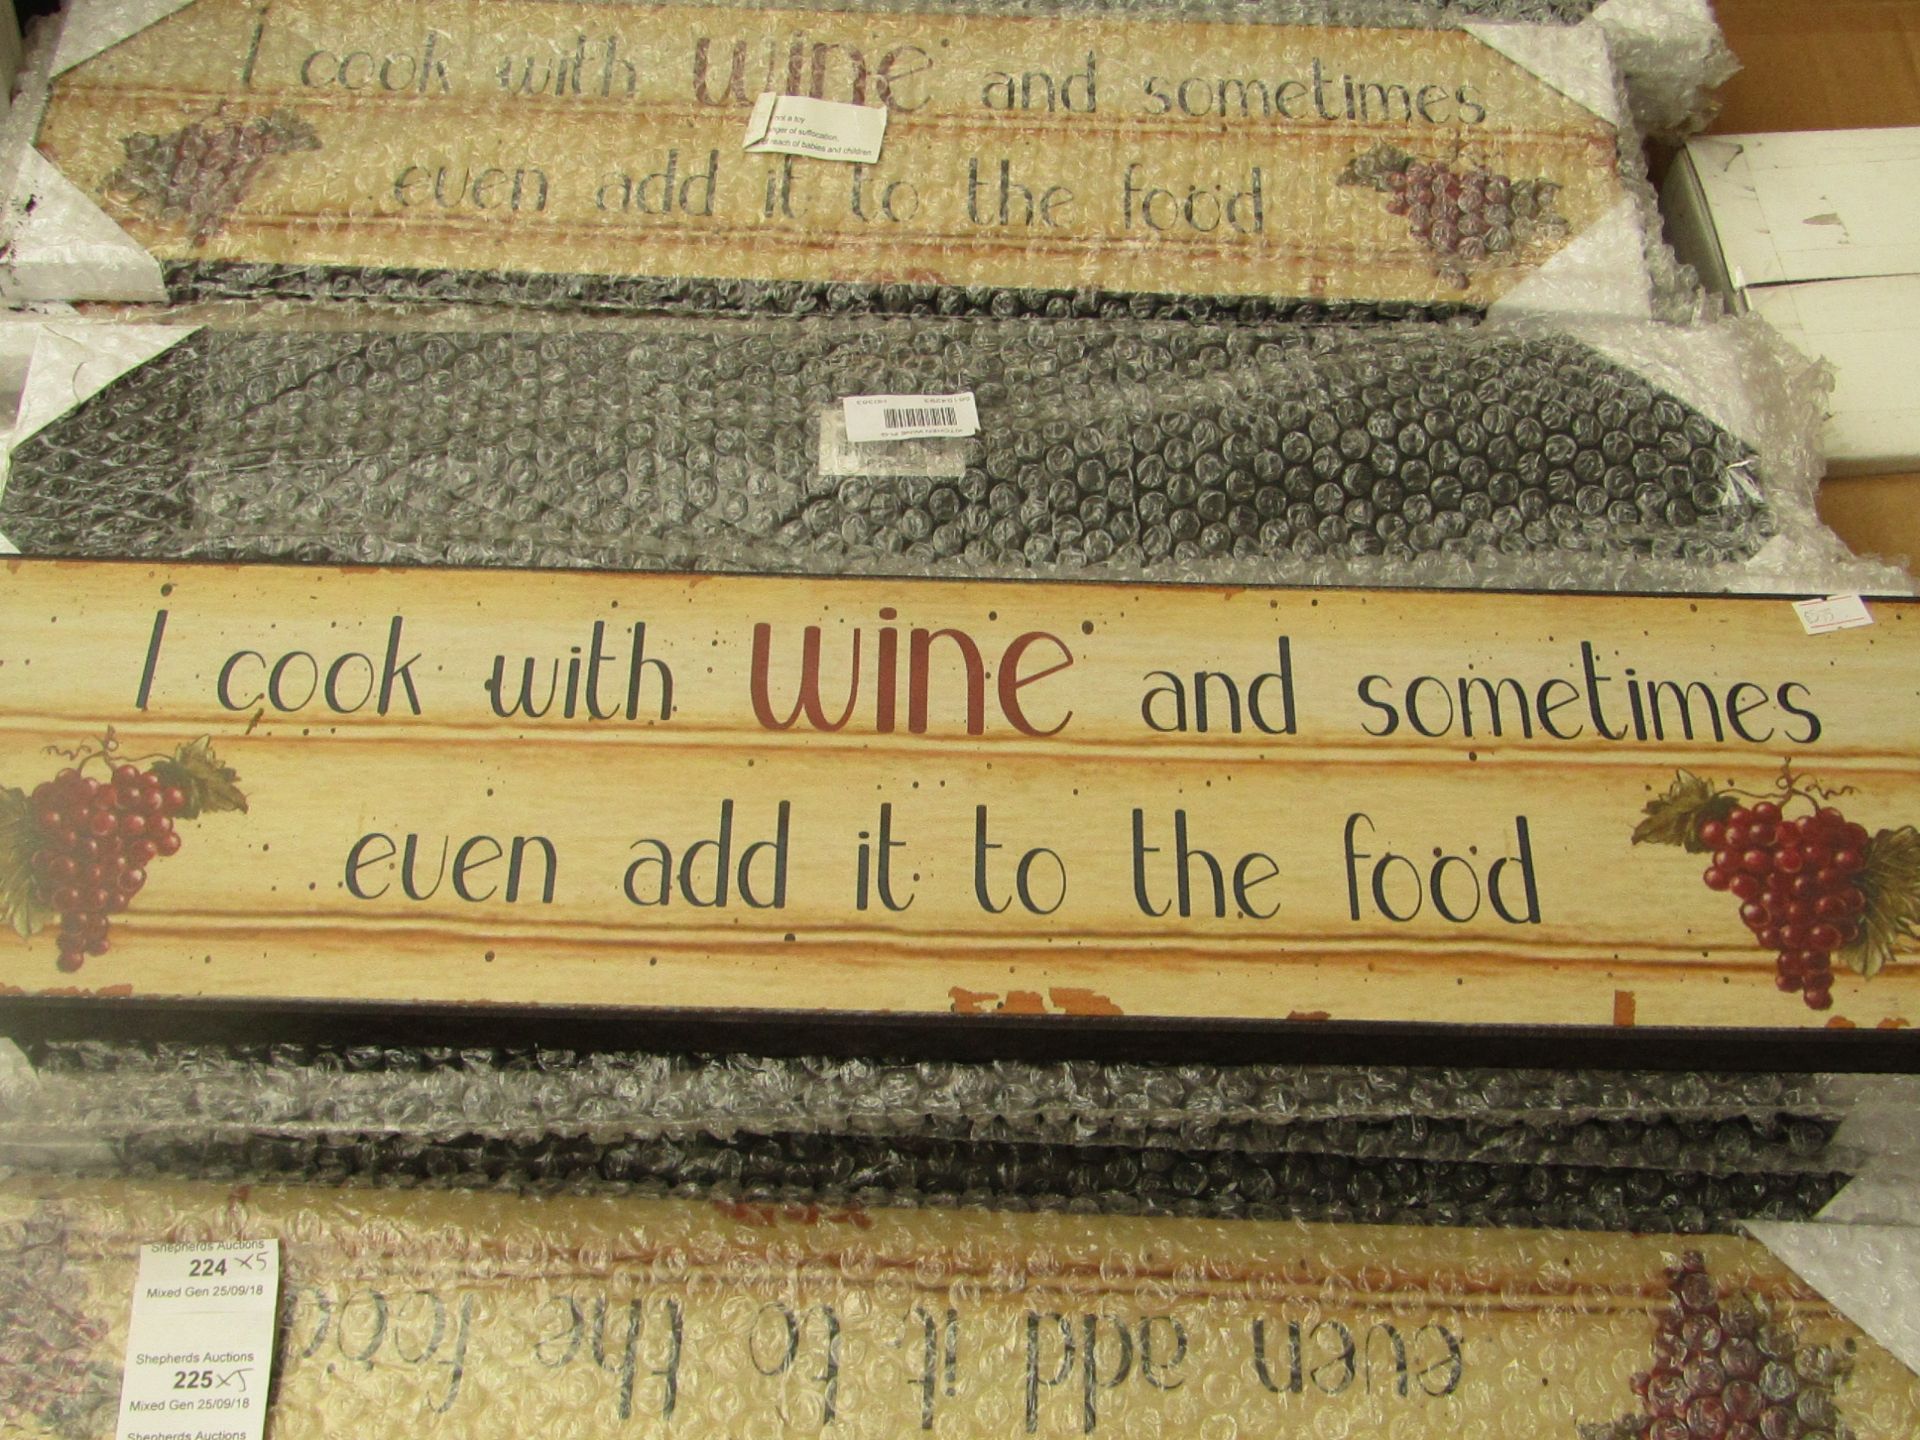 5x "I cook with wine and sometimes even add it to the food" decorative plaques, all new.